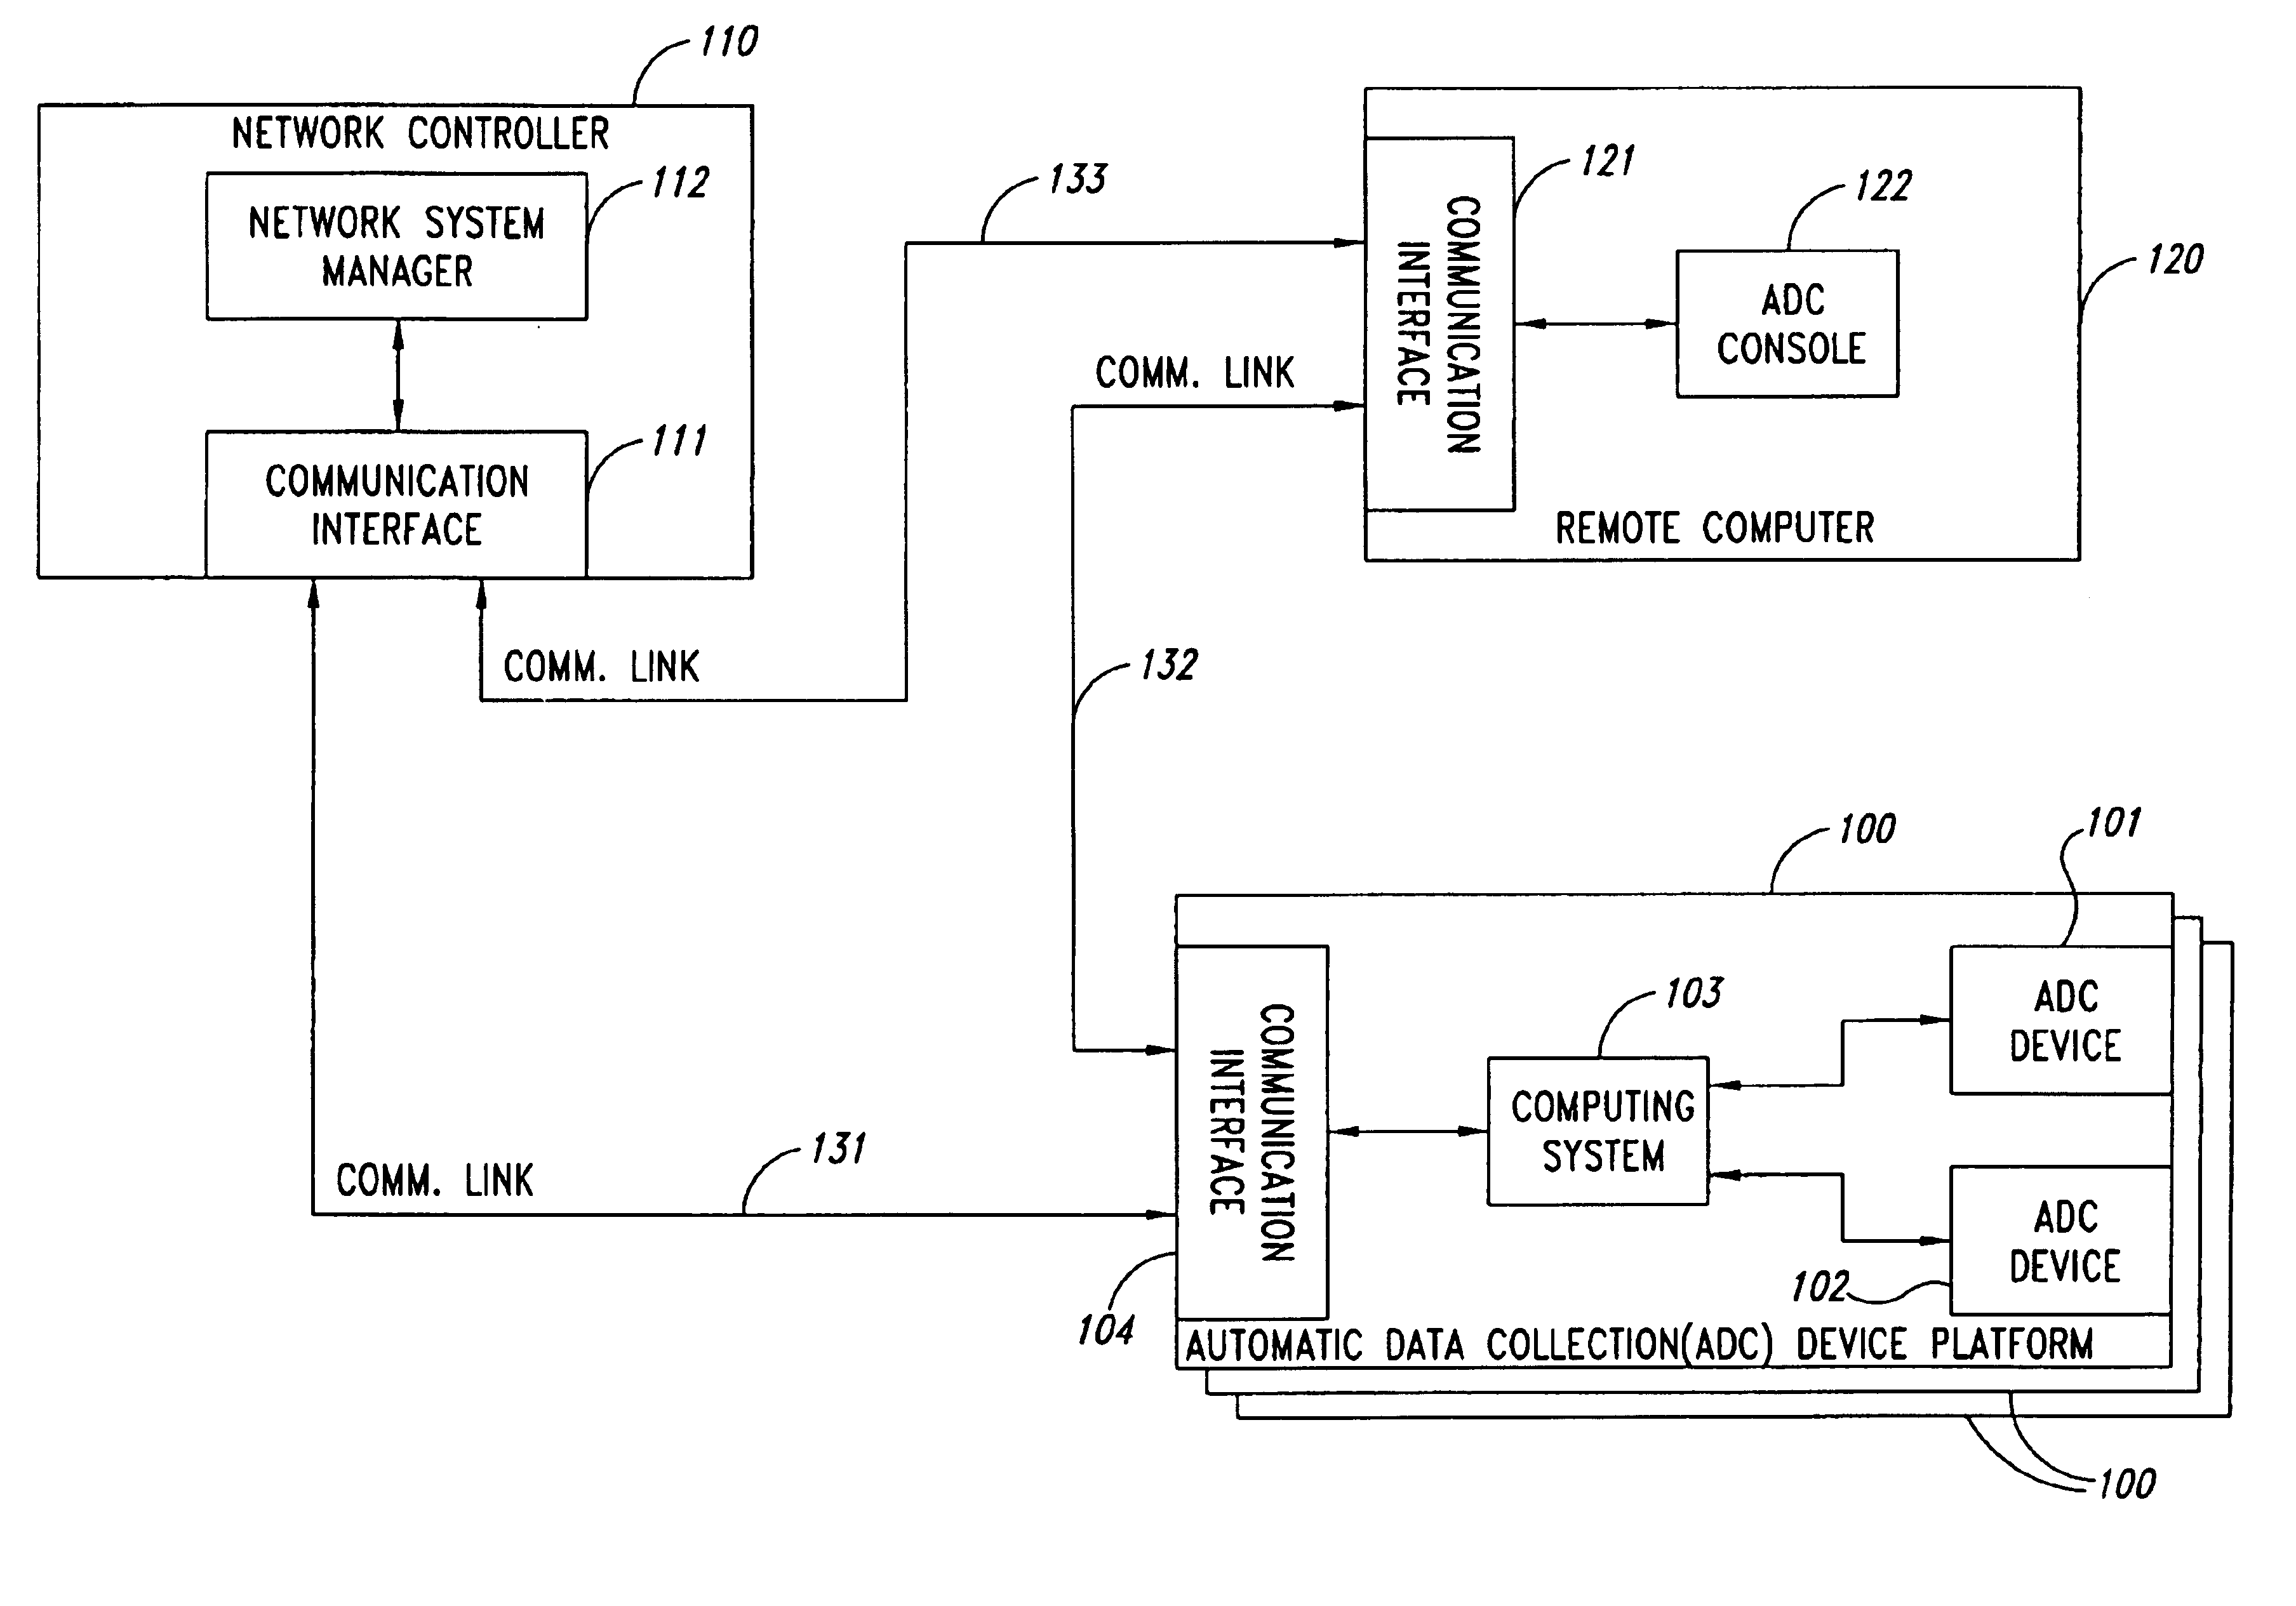 Remote anomaly diagnosis and reconfiguration of an automatic data collection device platform over a telecommunications network